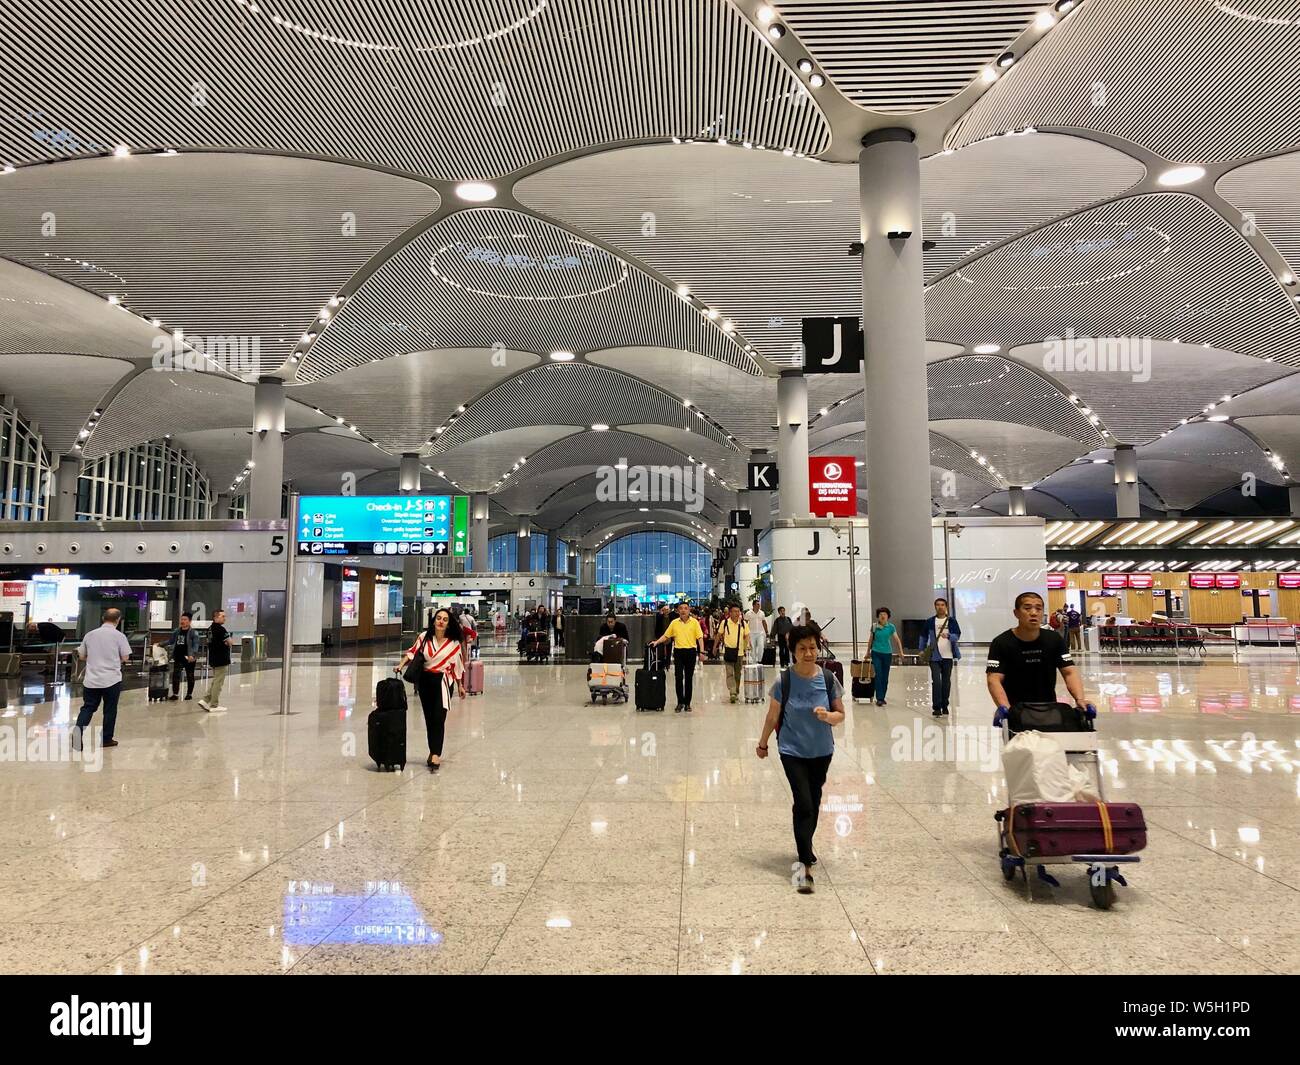 New ISTANBUL AIRPORT Interior View. Istanbul Airport (IGA) Is The New  International Airport Serving The City Of Istanbul. TURKEY. Stock Photo,  Picture and Royalty Free Image. Image 165686273.